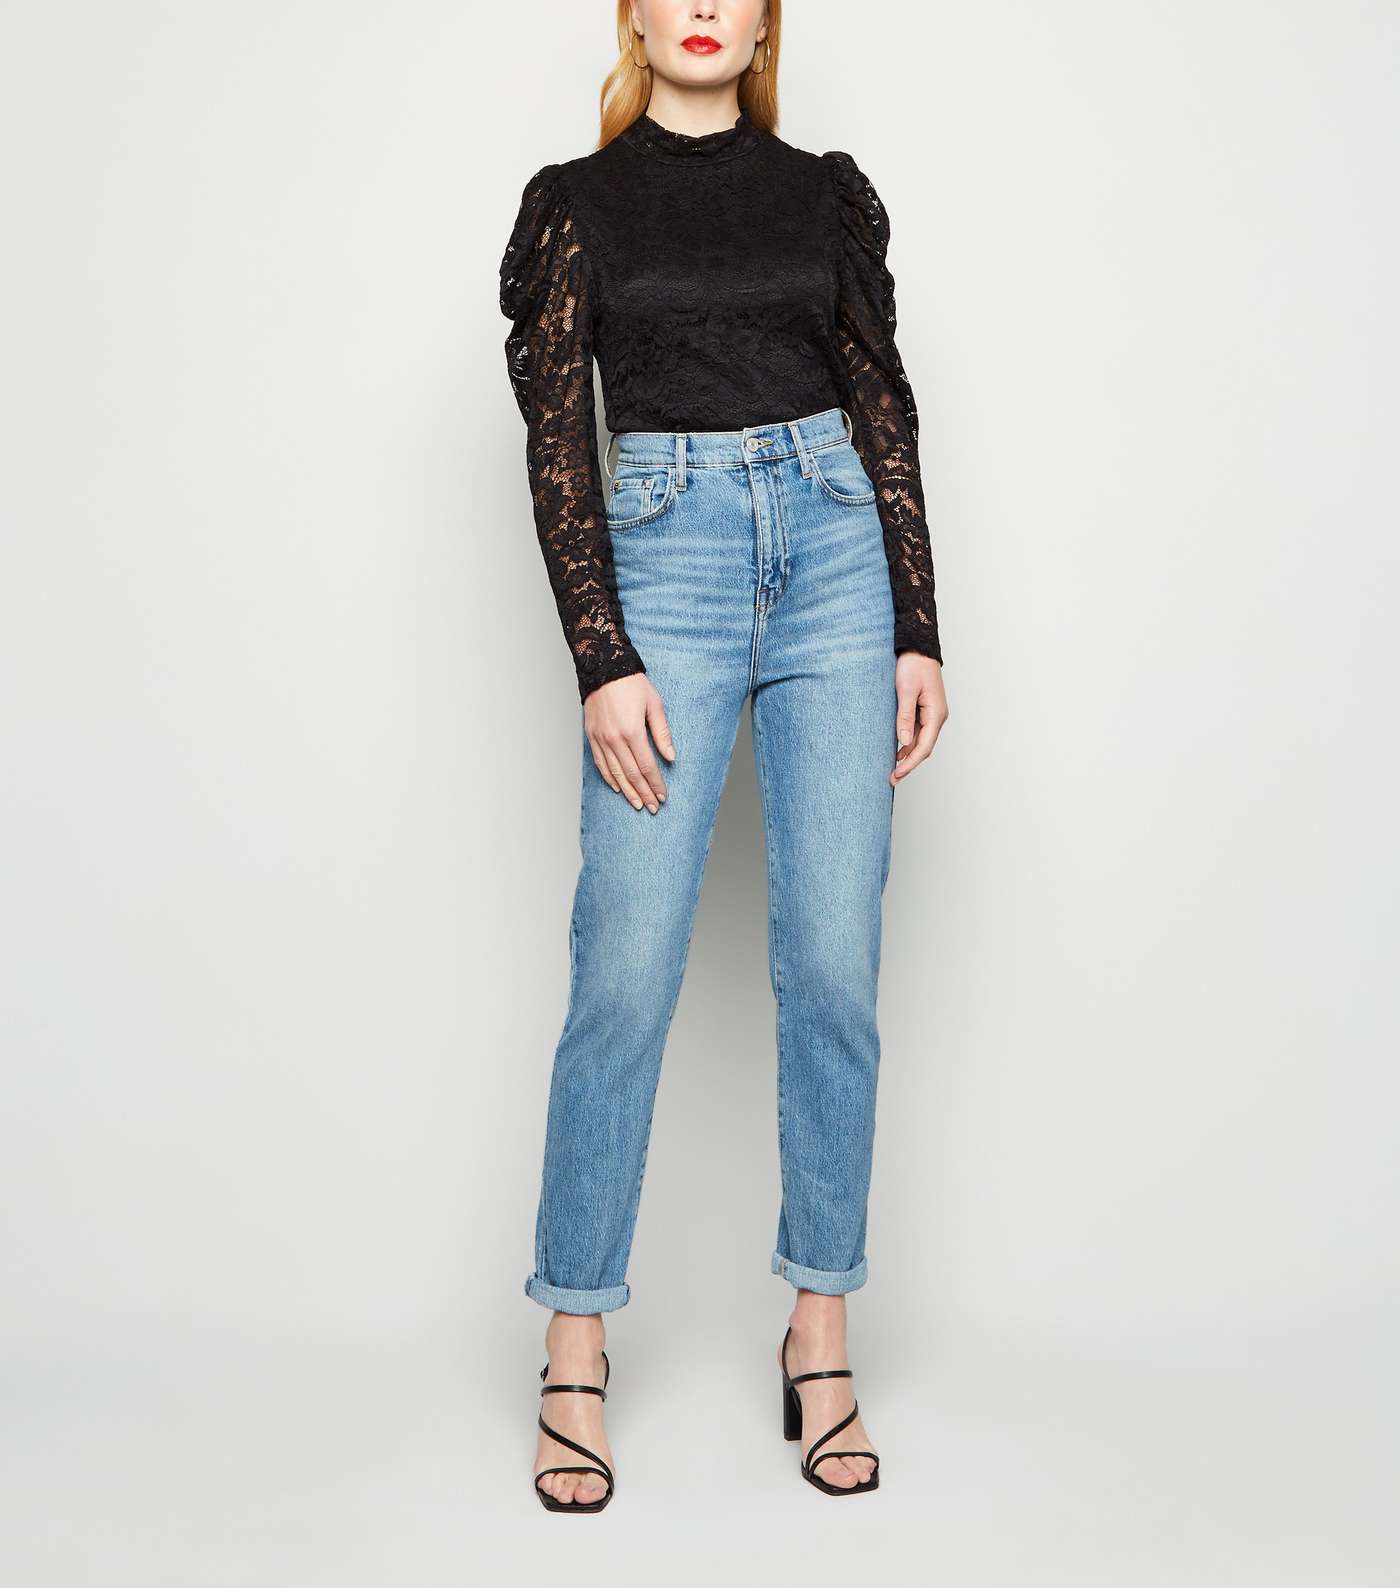 Cameo Rose Black Lace Puff Sleeve Top Image 2